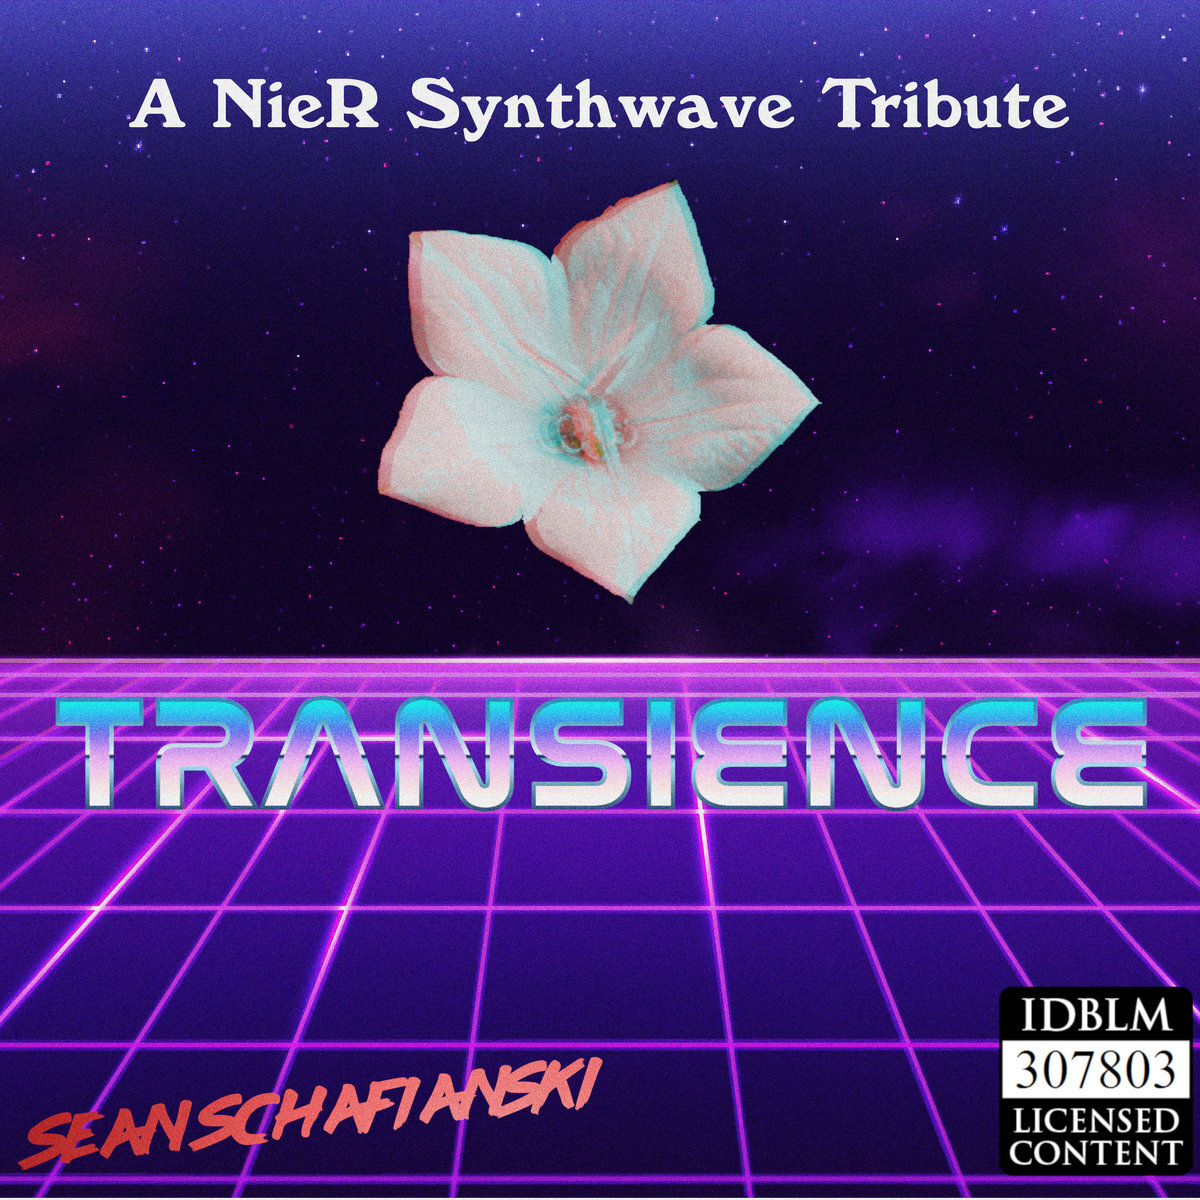 Transience: A NieR Synthwave Tribute